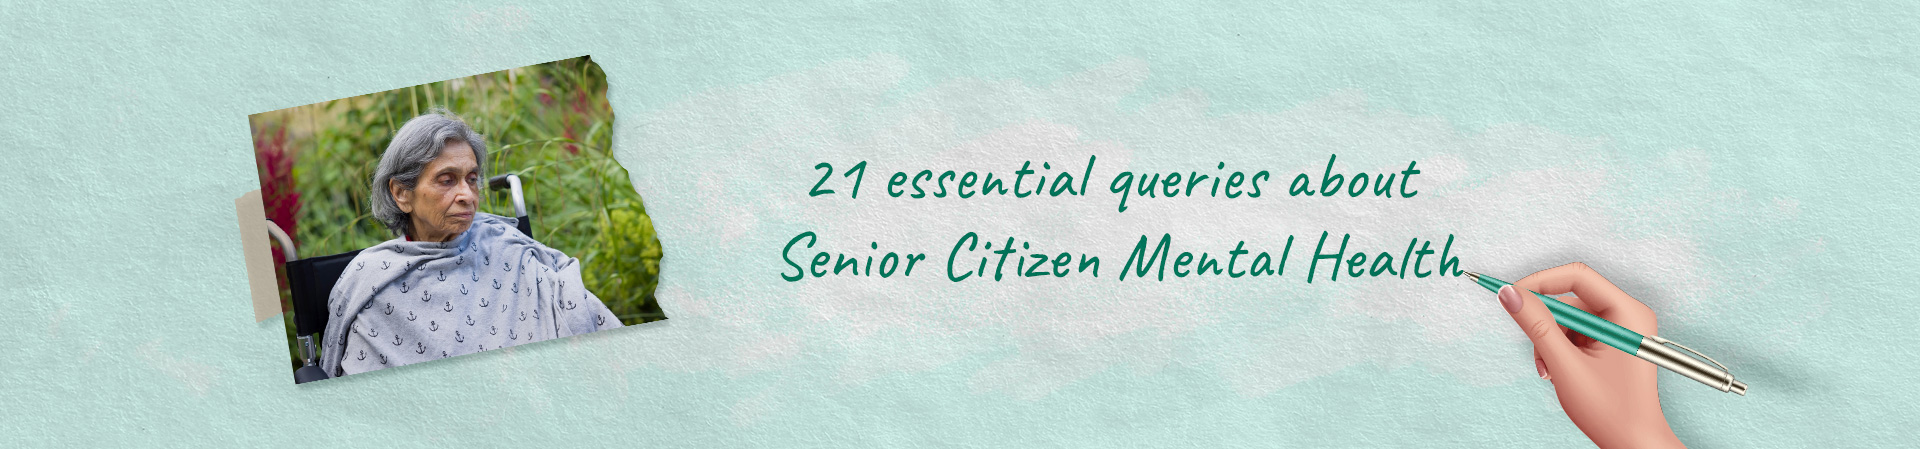 Top 21 Questions & Answers About Senior Citizen Mental Health